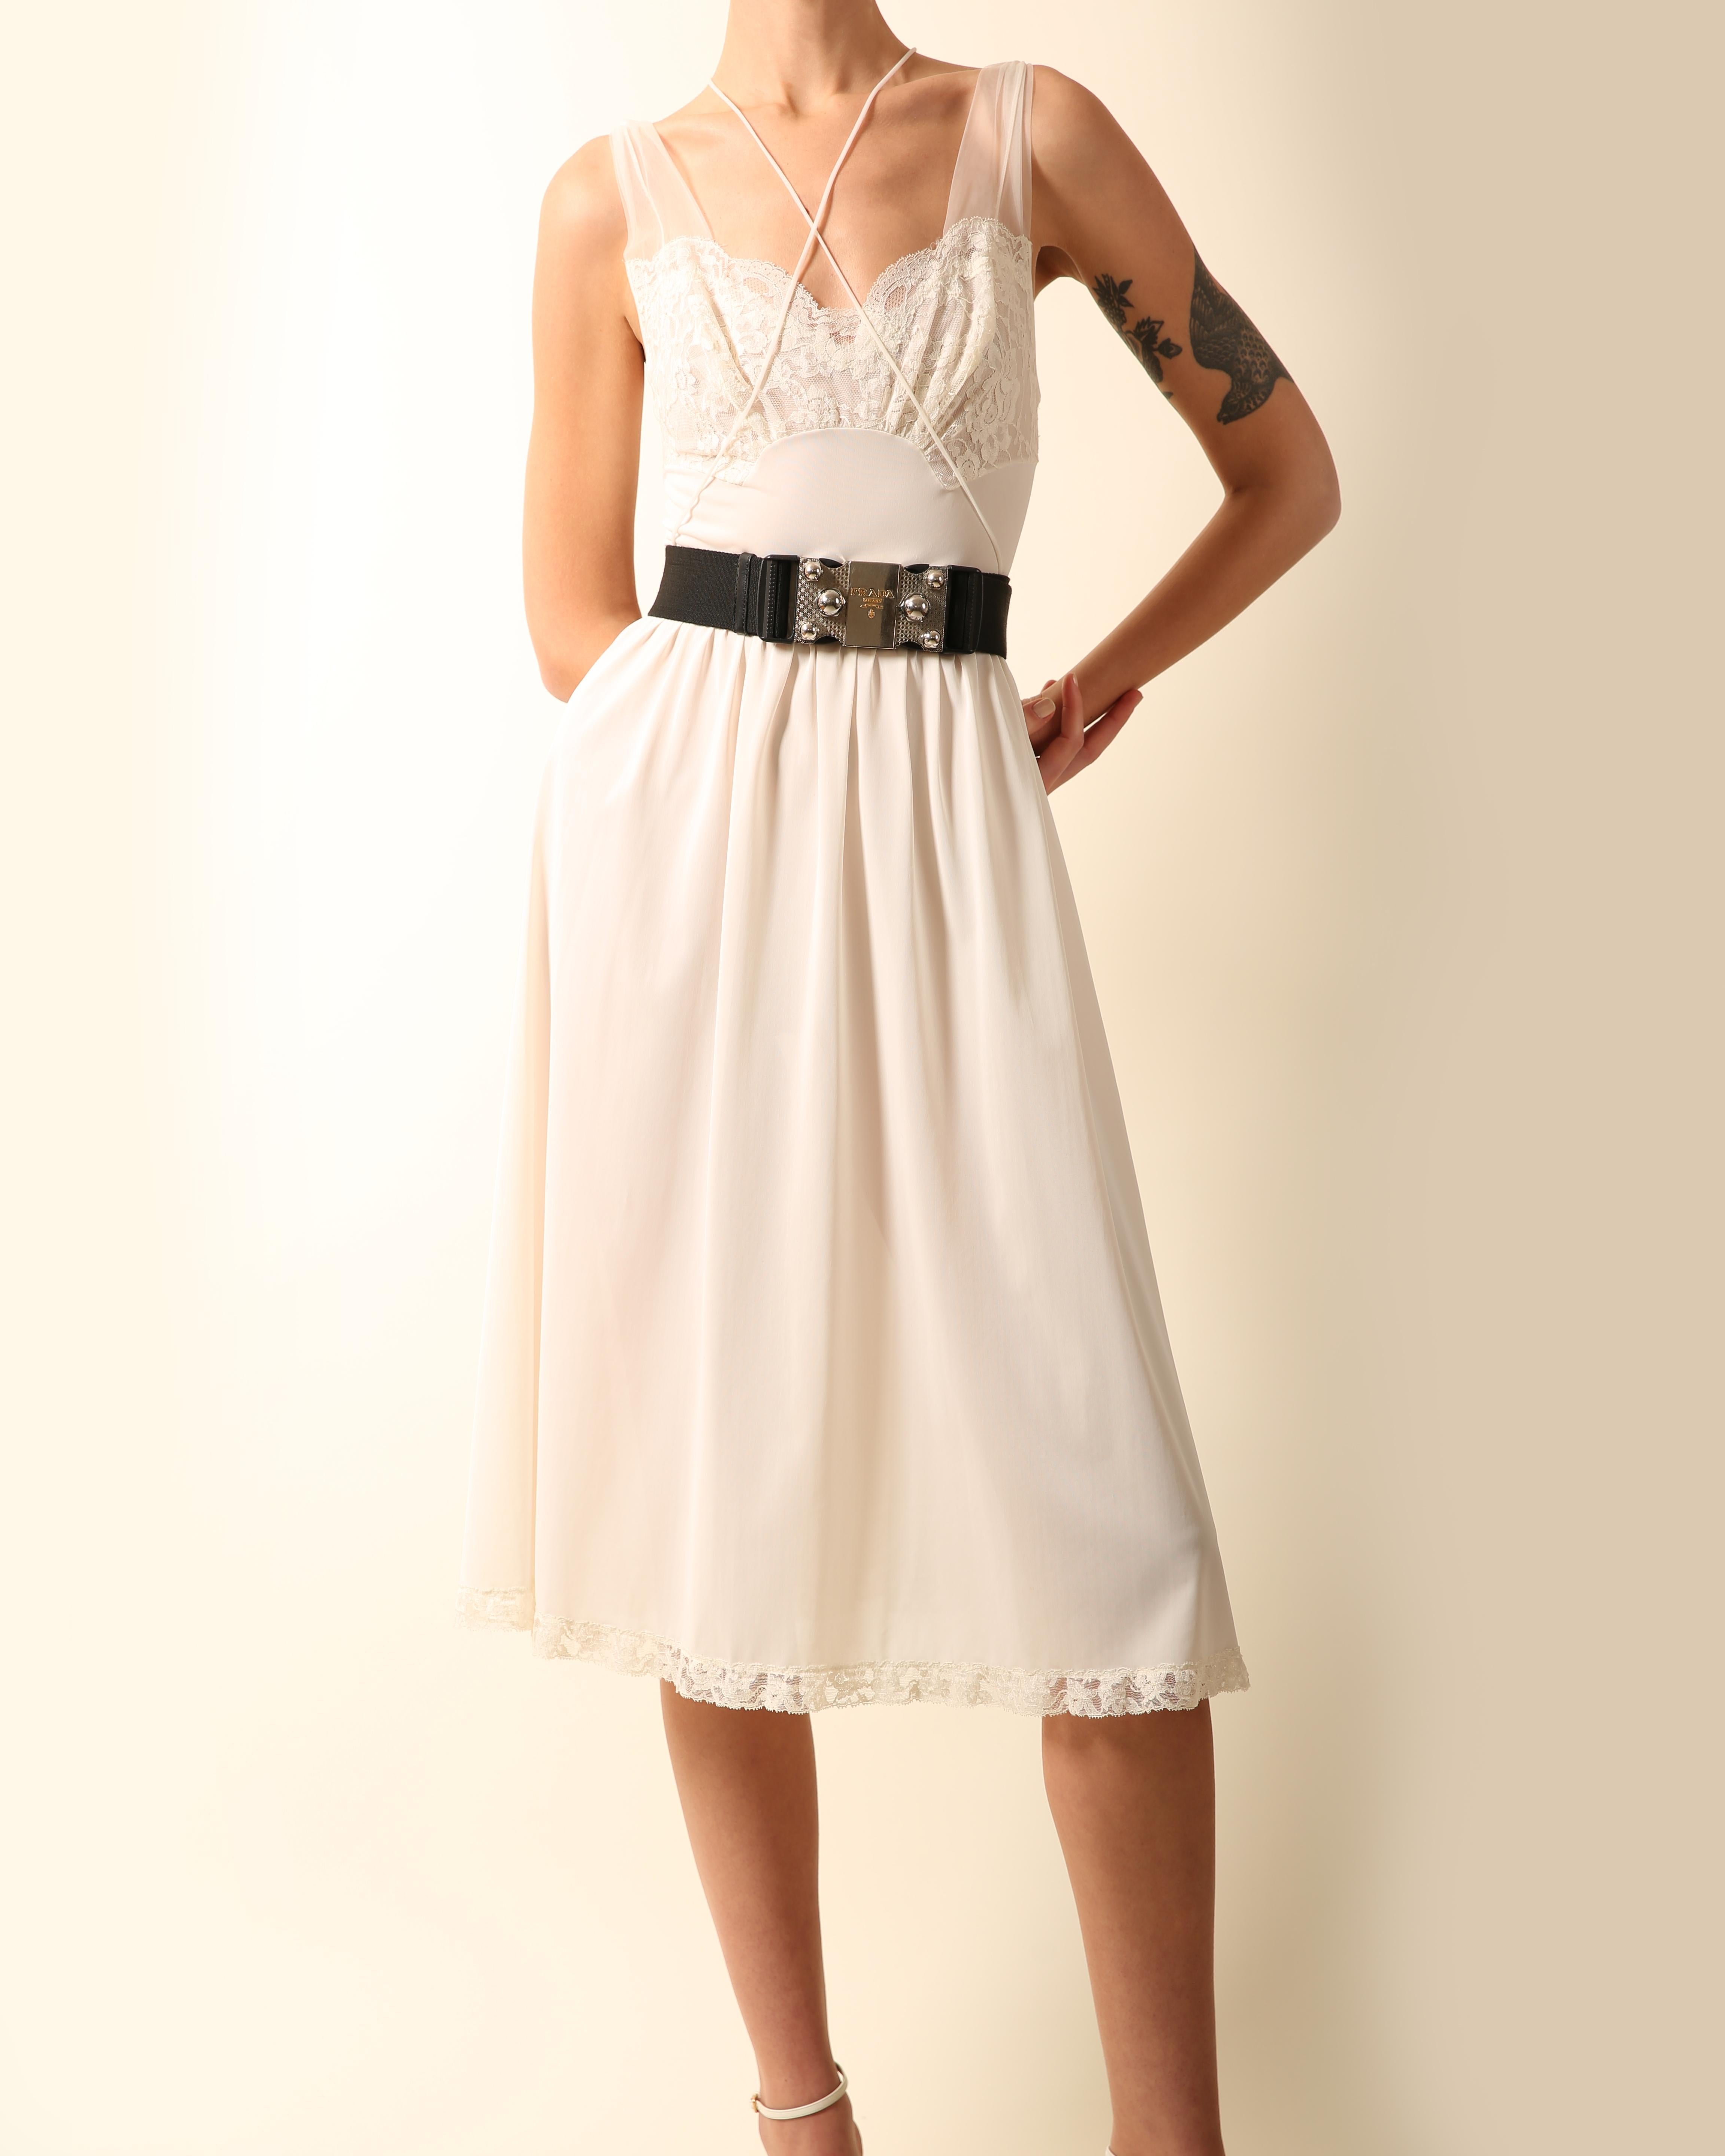 A very pretty vintage ivory dress with lace bust and sheer mesh straps
Cinched in waist
Attached straps that cross over the body
Lace trim hem
Belt not included 

Composition:
No composition label but estimated to be stretch nylon

Size:
No size